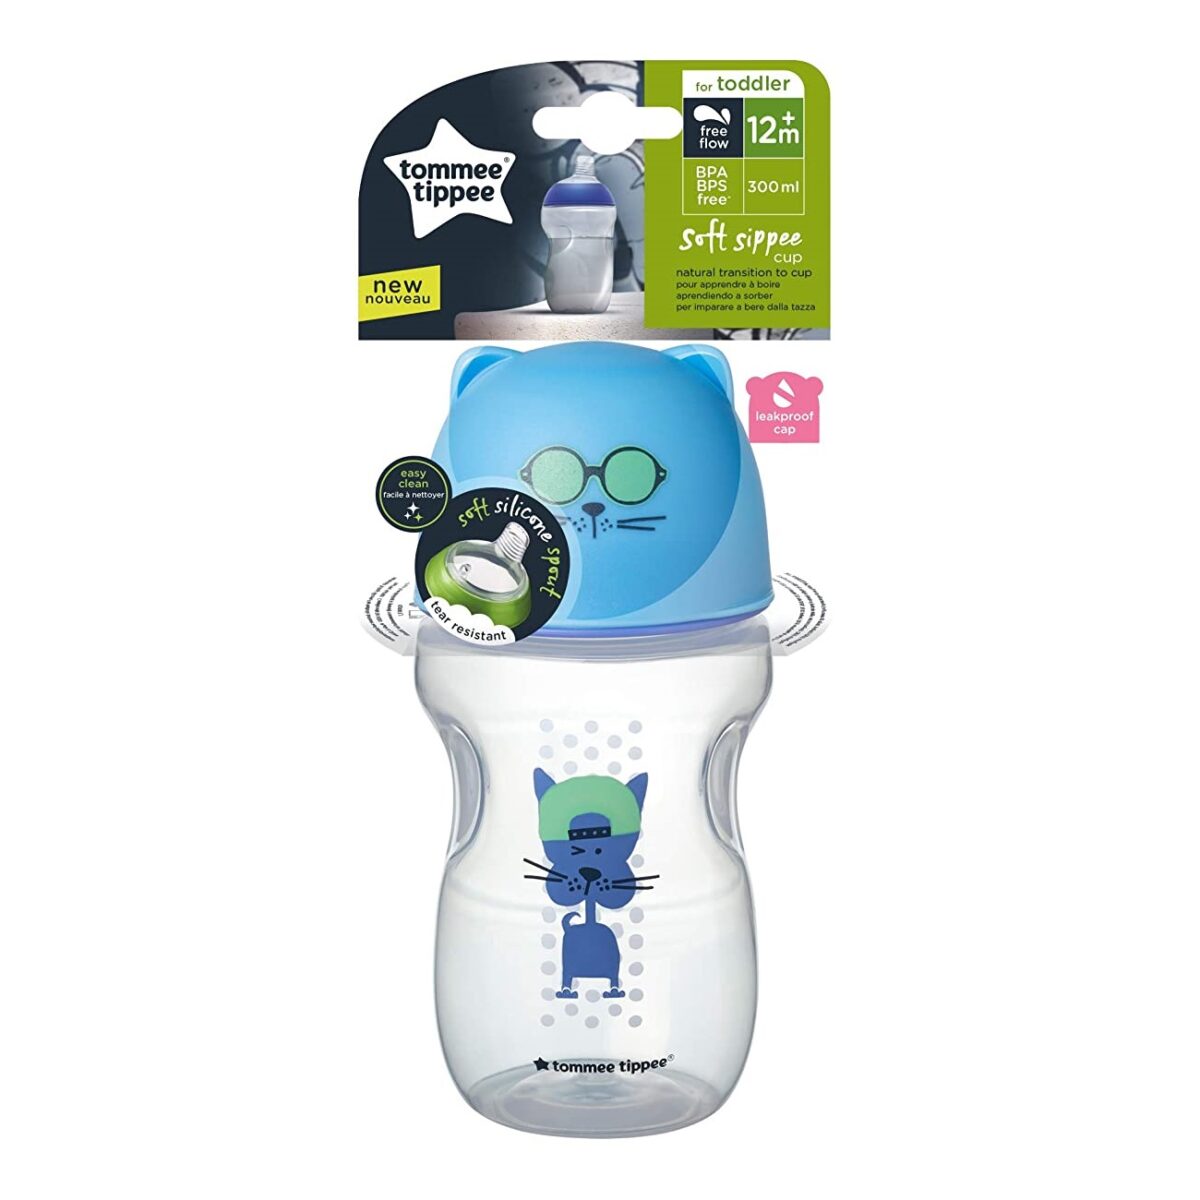 tommee-tippee-soft-sippee-%ce%ba%cf%8d%cf%80%ce%b5%ce%bb%ce%bb%ce%bf-%ce%bc%cf%80%ce%bb%ce%b5-12m-300ml-mamaspharmacy-2